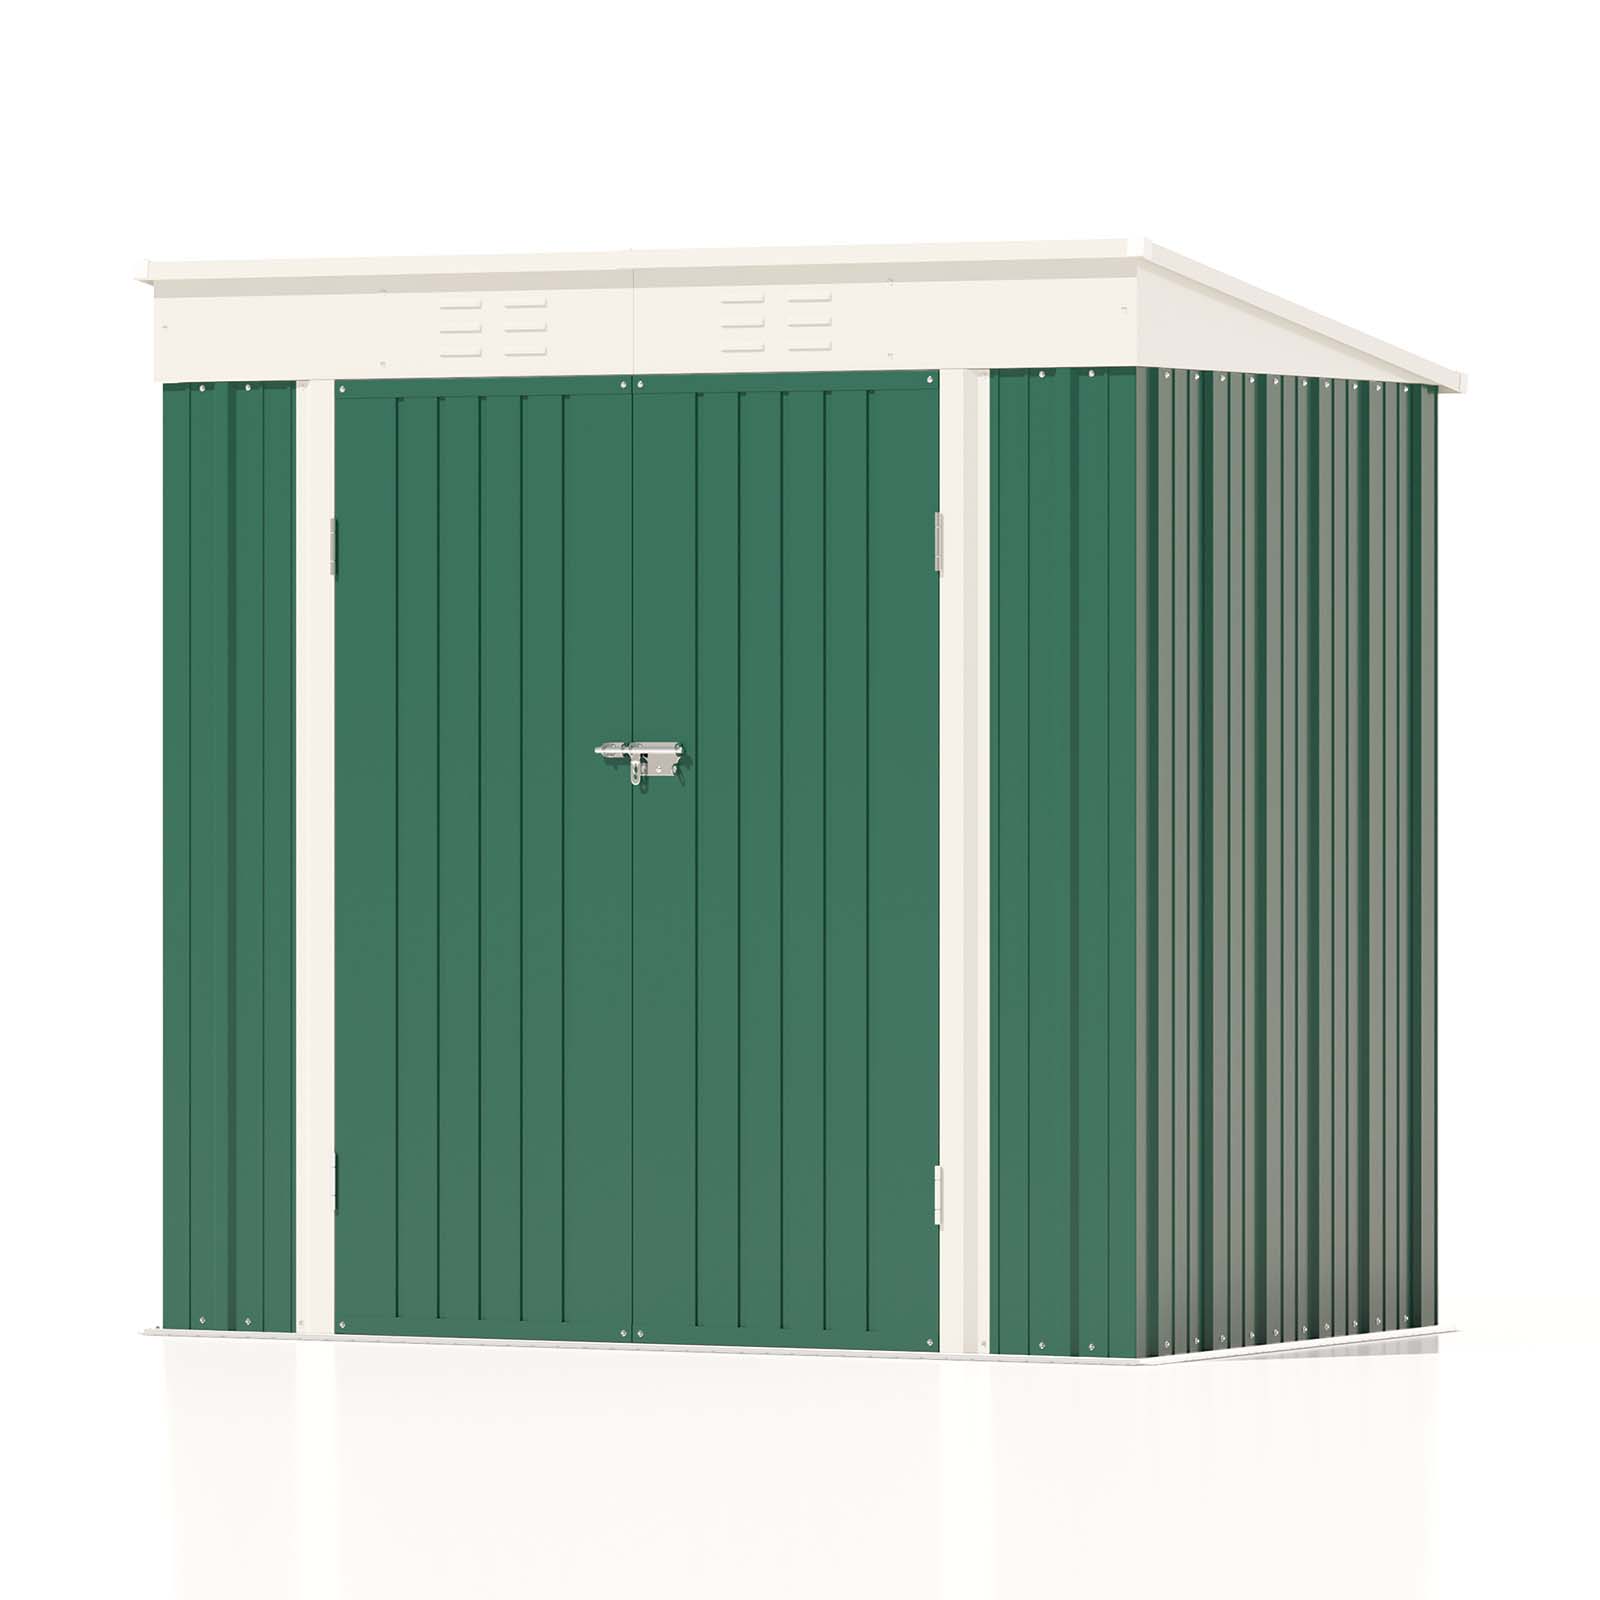 Patiowell 6x4 Metal Shed-Bottle Green